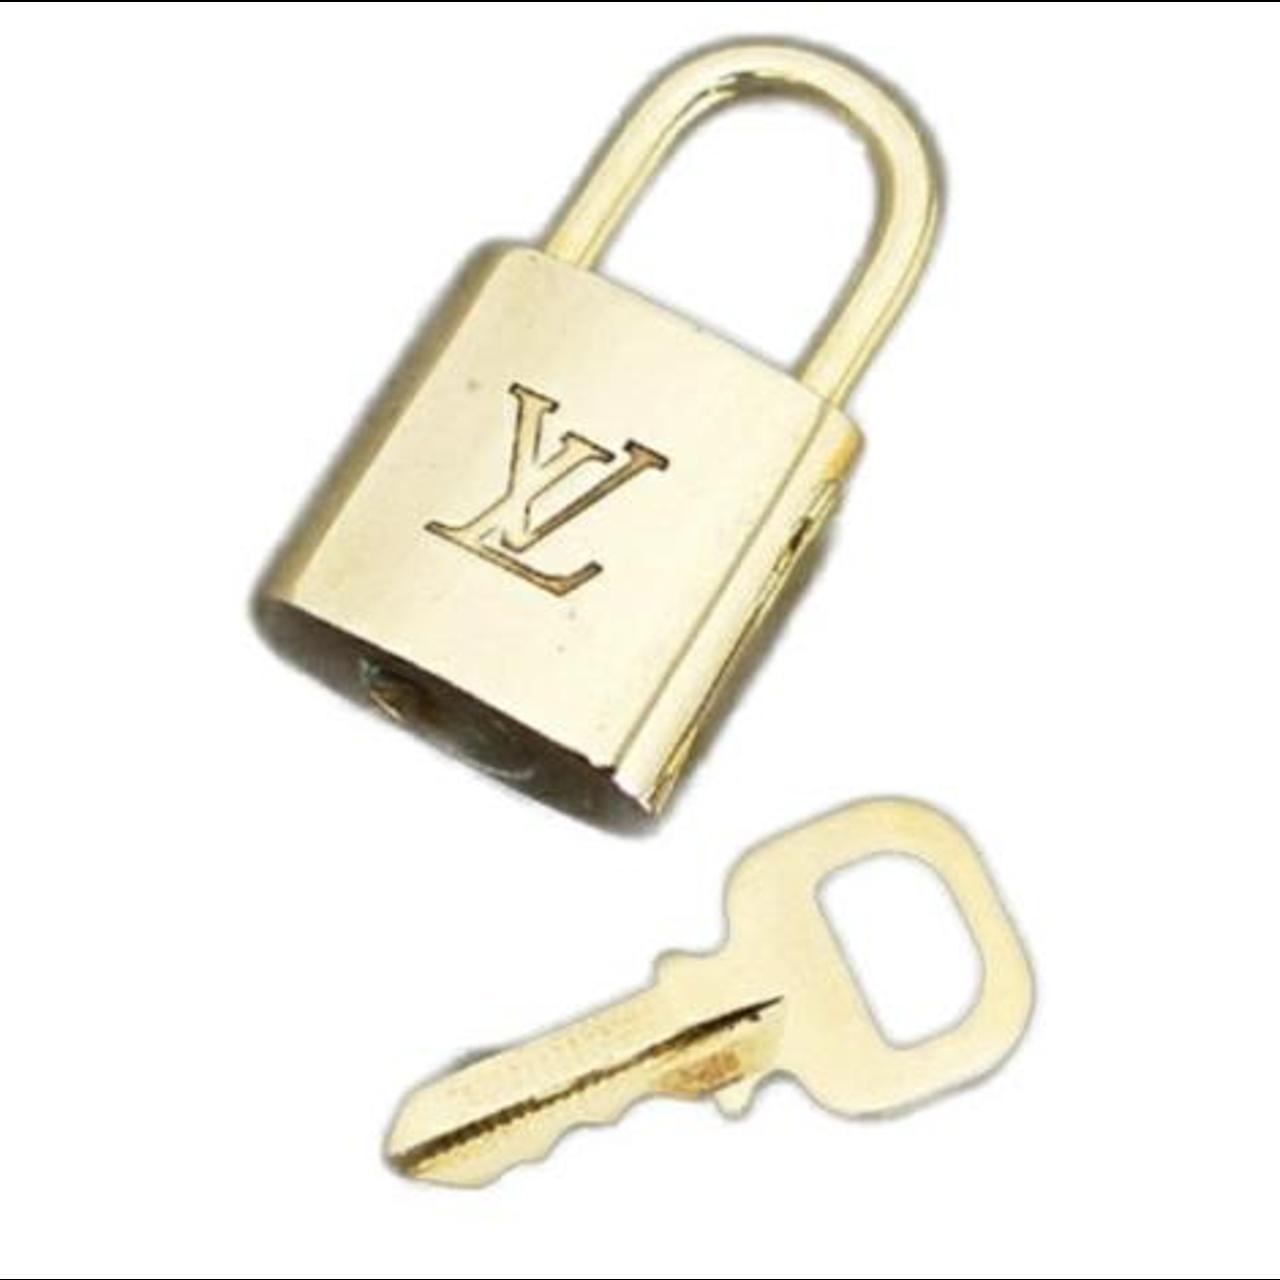 louis vuitton lock and key authentic